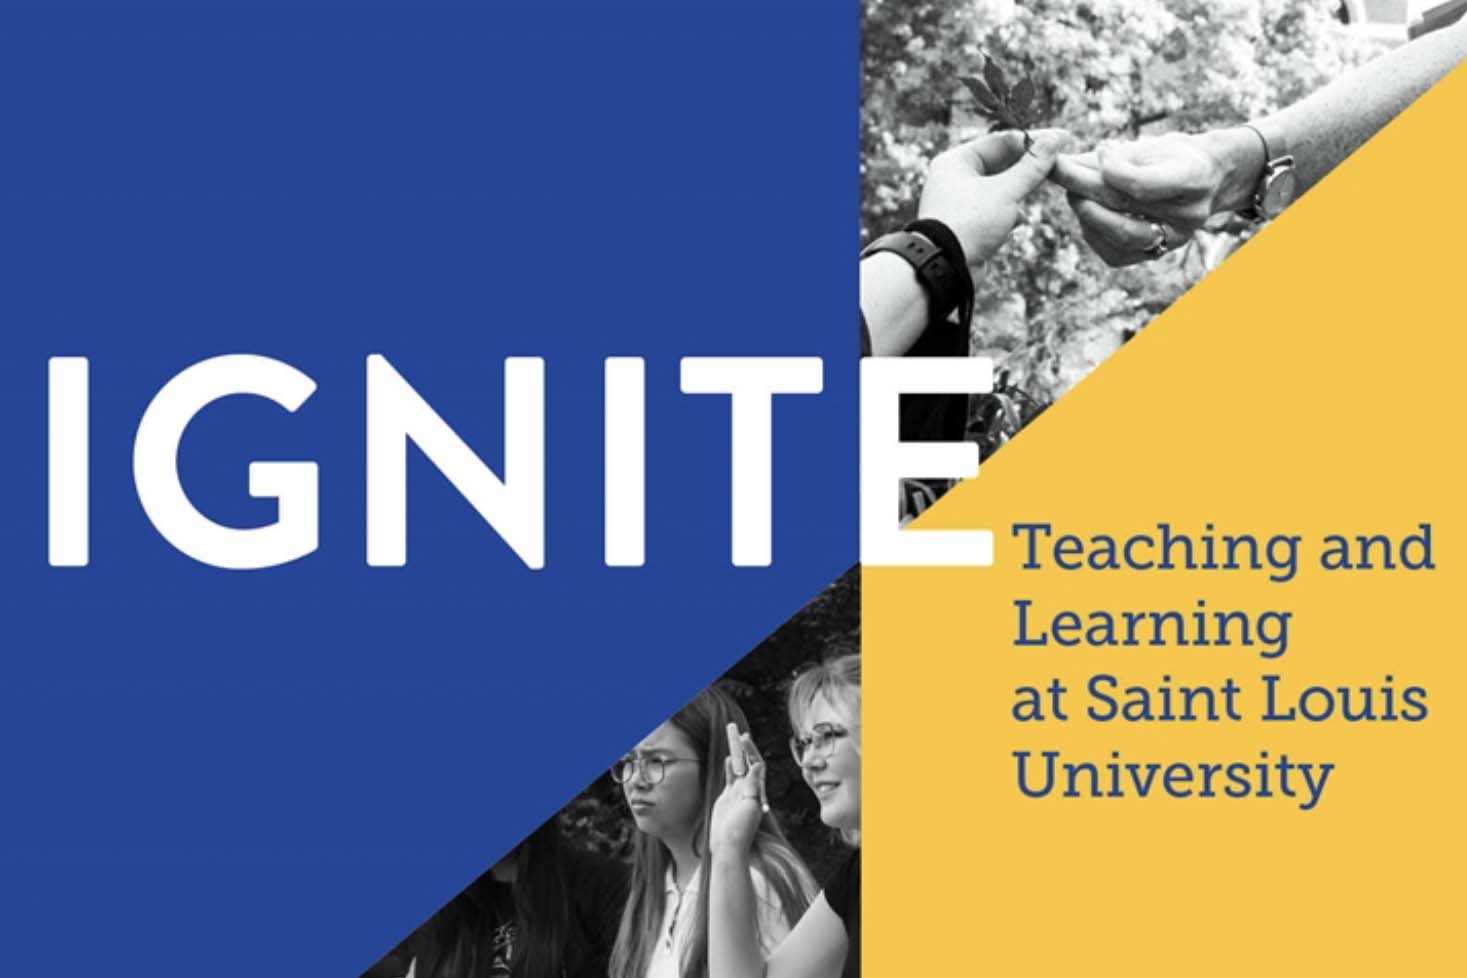 A graphic design showing students interspersed with blocks of color reading "Ignite: Teaching and Learning at Saint ˻ֱ University"